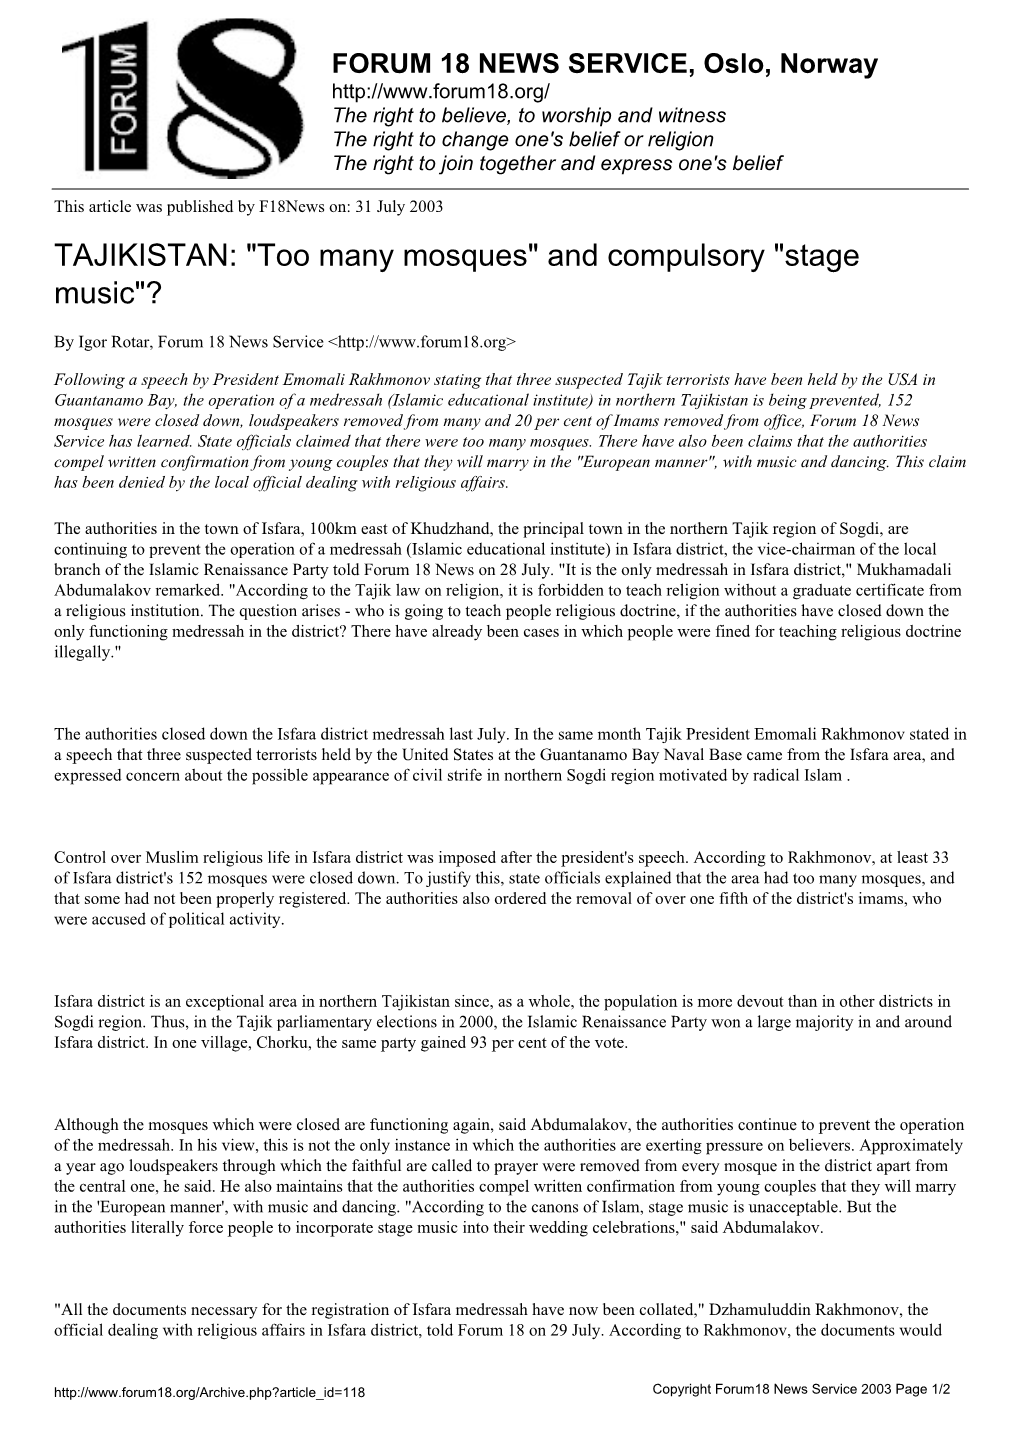 TAJIKISTAN: "Too Many Mosques" and Compulsory "Stage Music"?